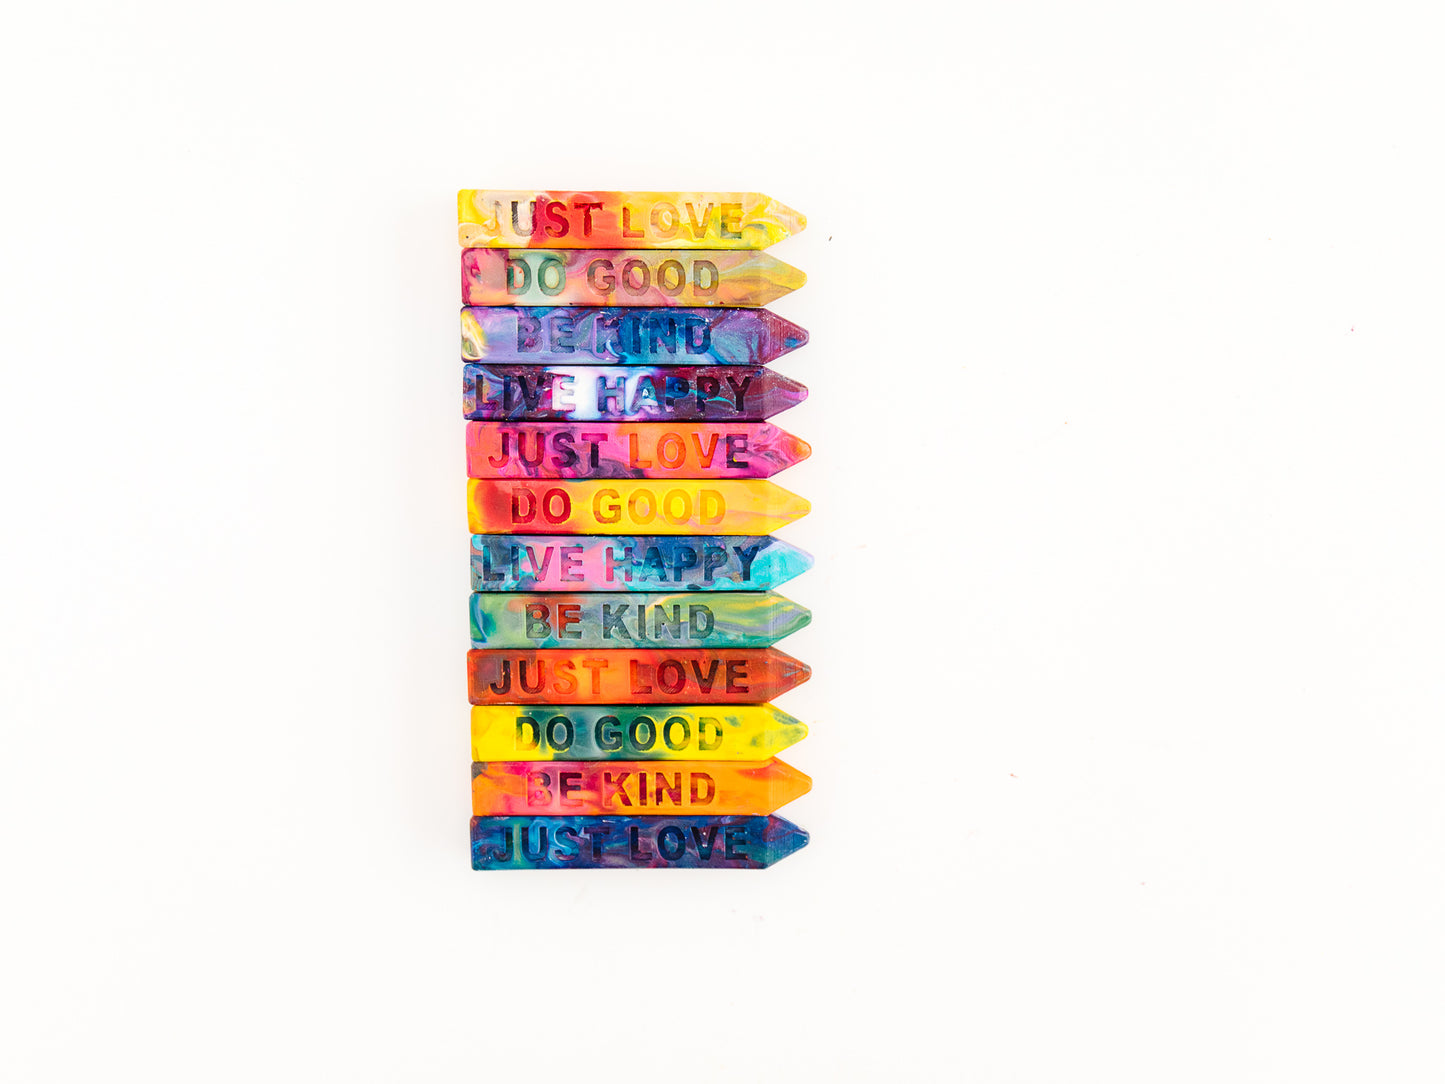 Customized Crayons from Art 2 the Extreme® the Original Rainbow Crayon® gifts for kids - 4Pk set of Kindness Crayons - Stocking Stuffers for kids